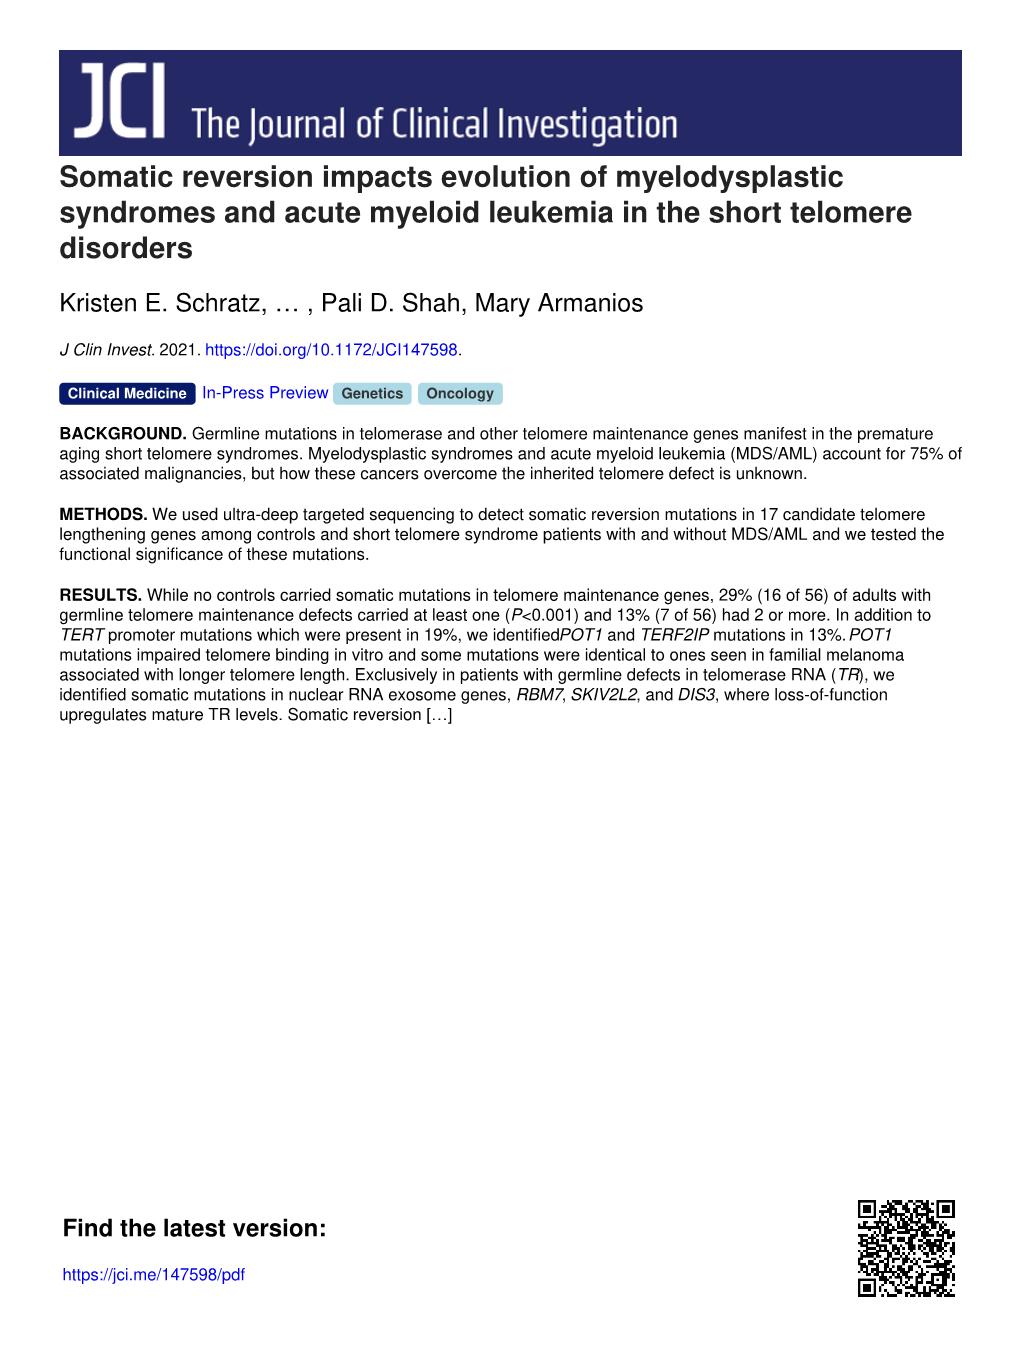 Somatic Reversion Impacts Evolution of Myelodysplastic Syndromes and Acute Myeloid Leukemia in the Short Telomere Disorders